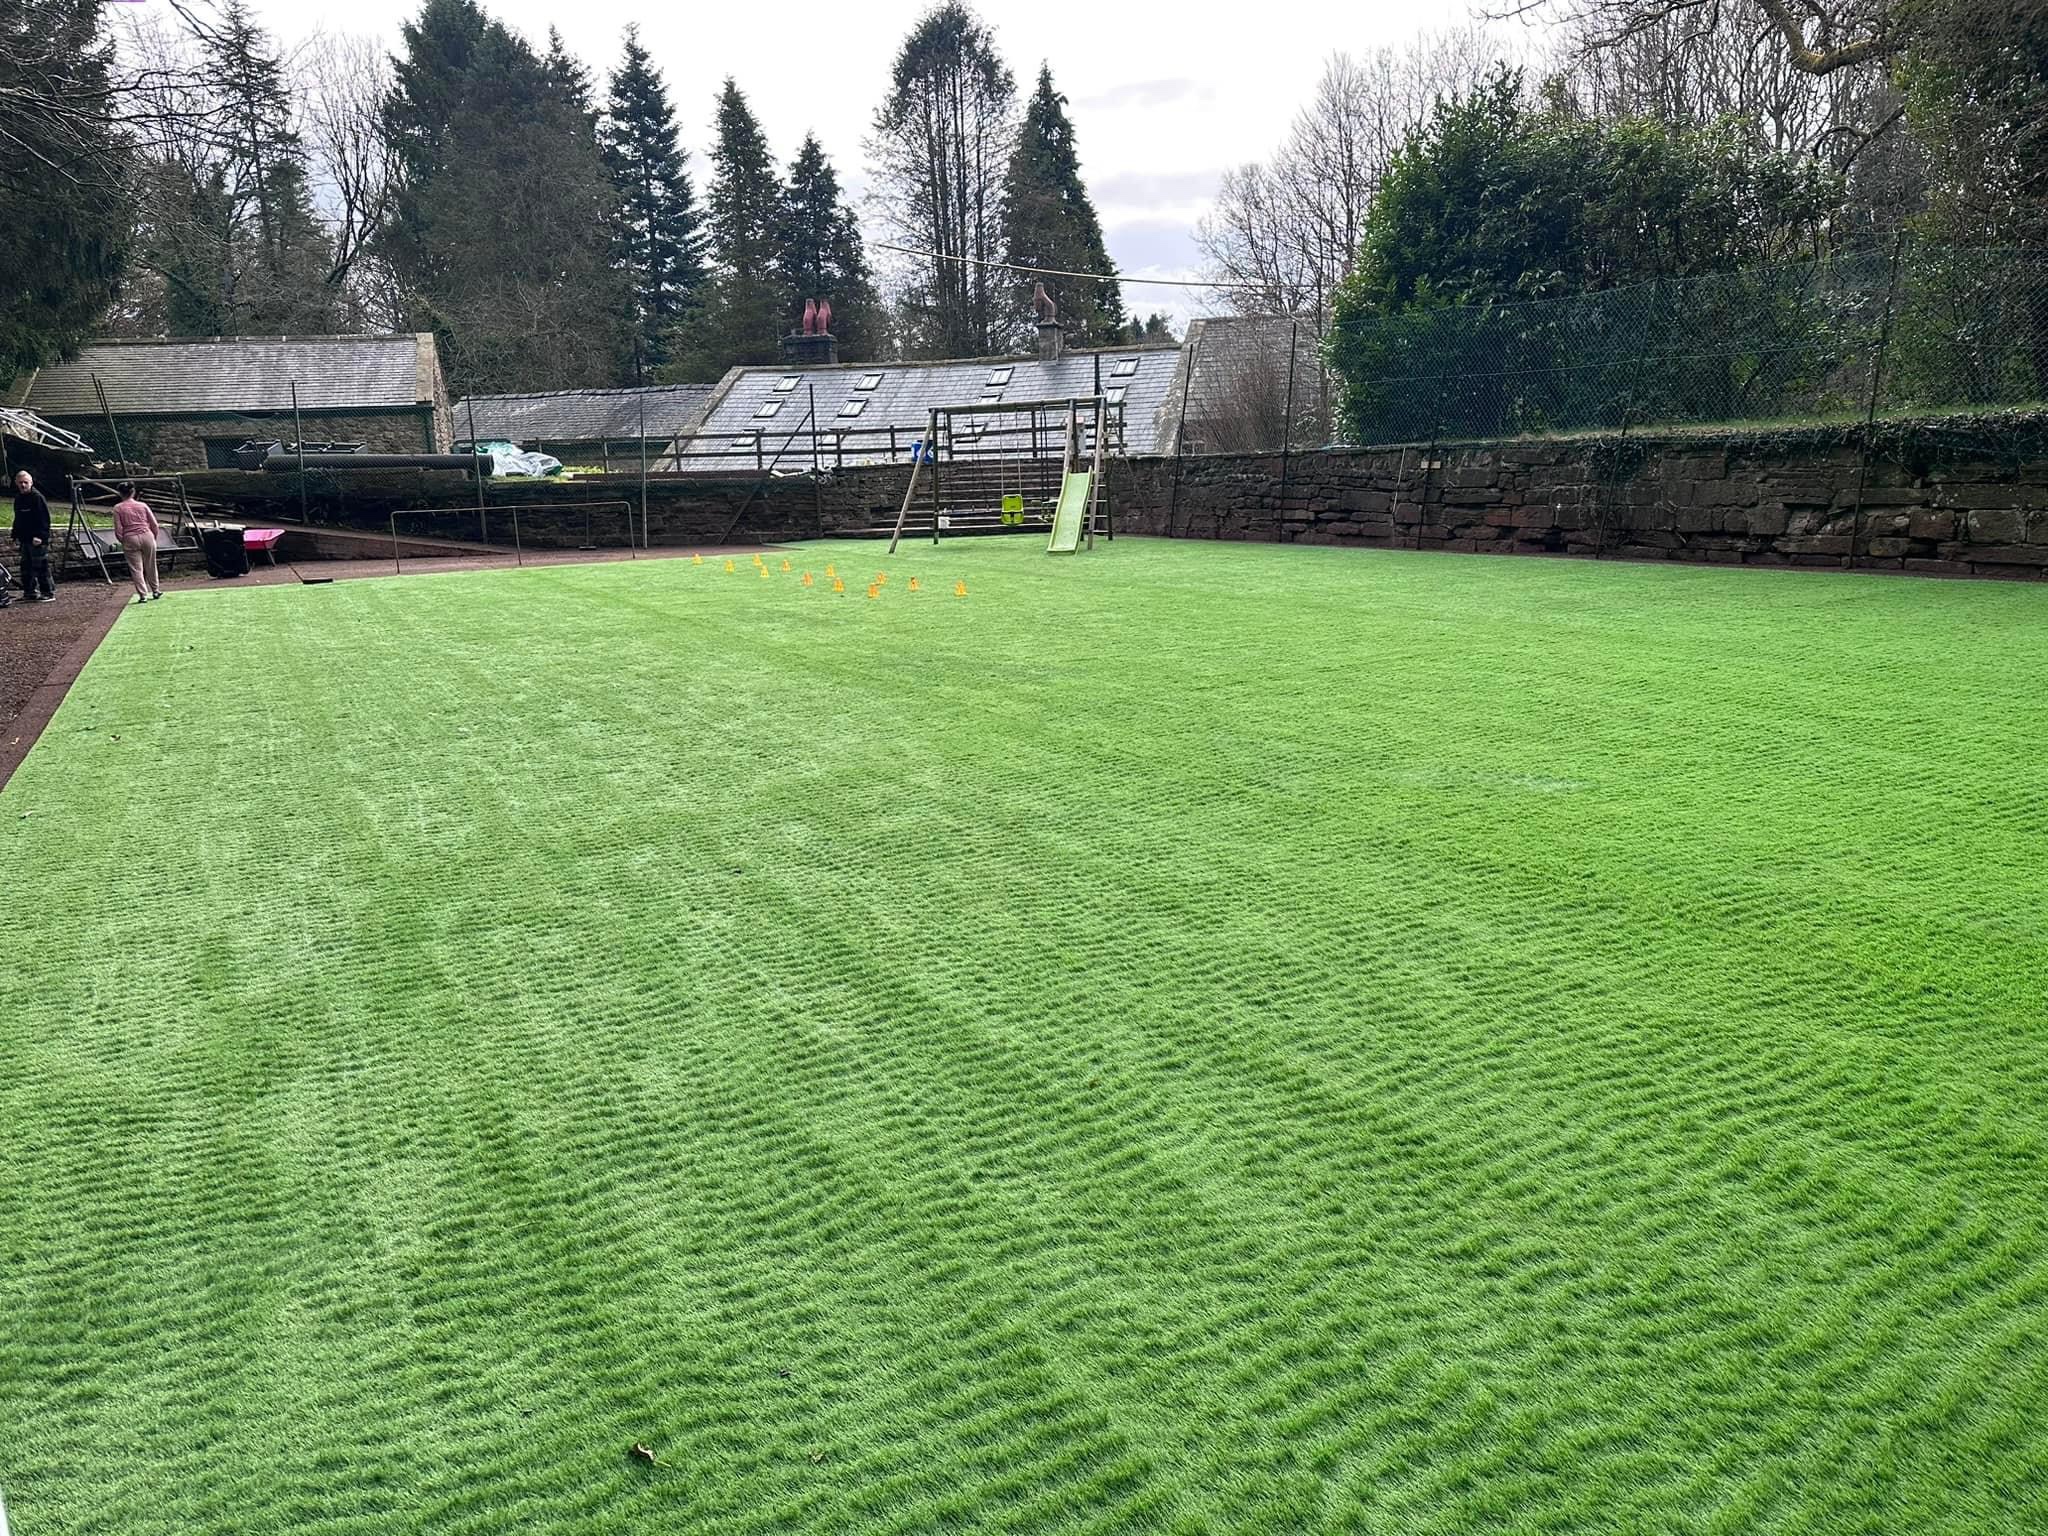 Family Footballers Dream!  Check out this 500Sq Foot of Artificial Grass we installed!